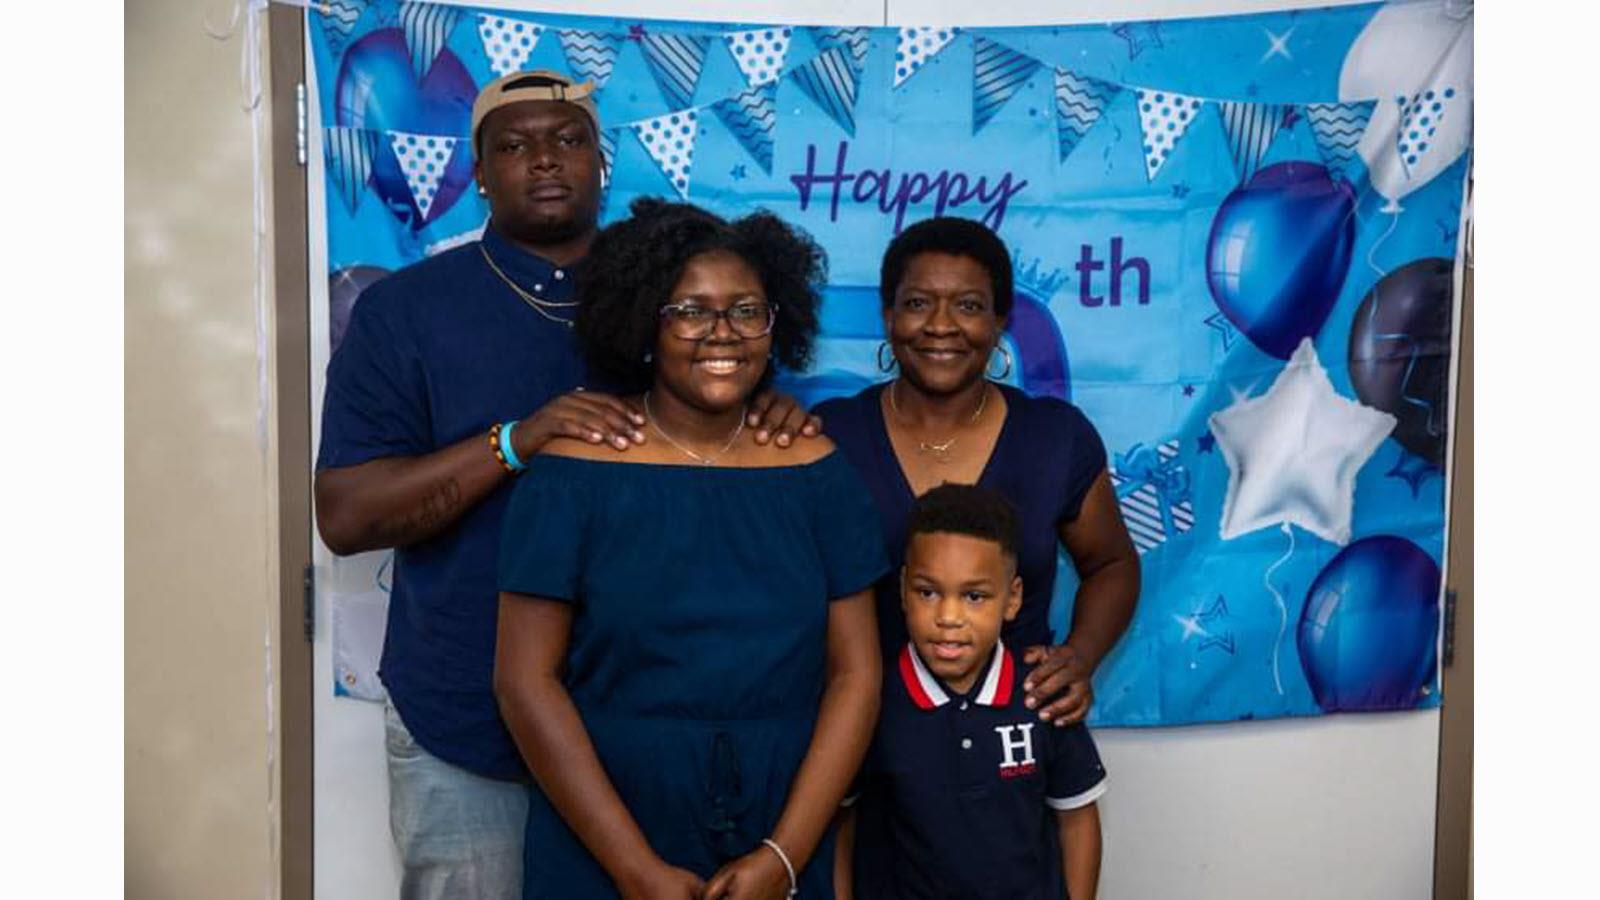 Judith McClellan and family in a snapshot at a birthday party